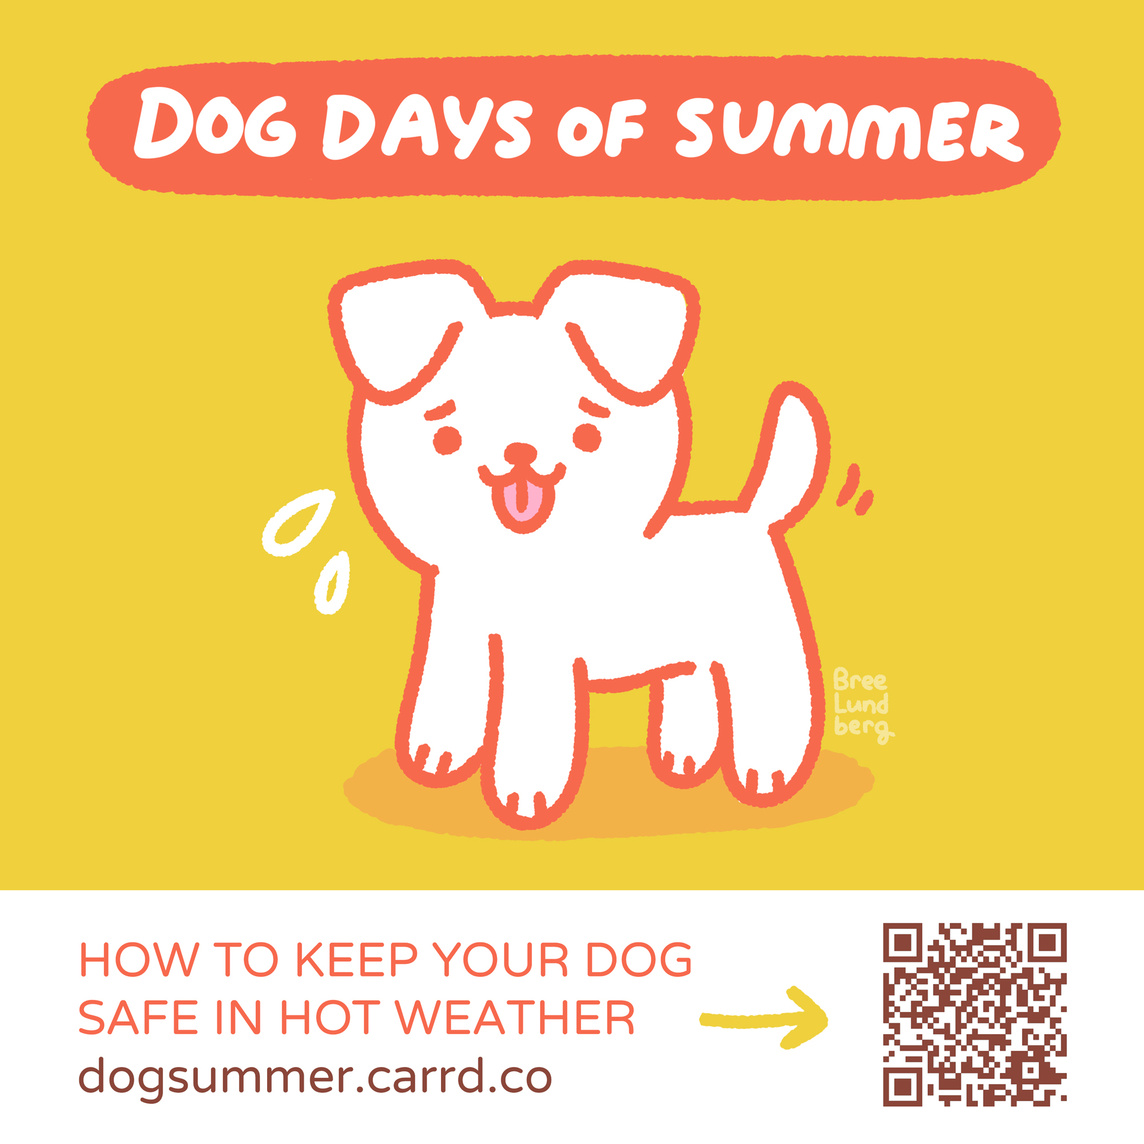 Illustration of a cute white dog on yellow background with orange line work. Above it says "dog days of summer". Below is text that reads "how to keep your dog safe in hot weather - dogsummer.carrd.co " and a QR code.